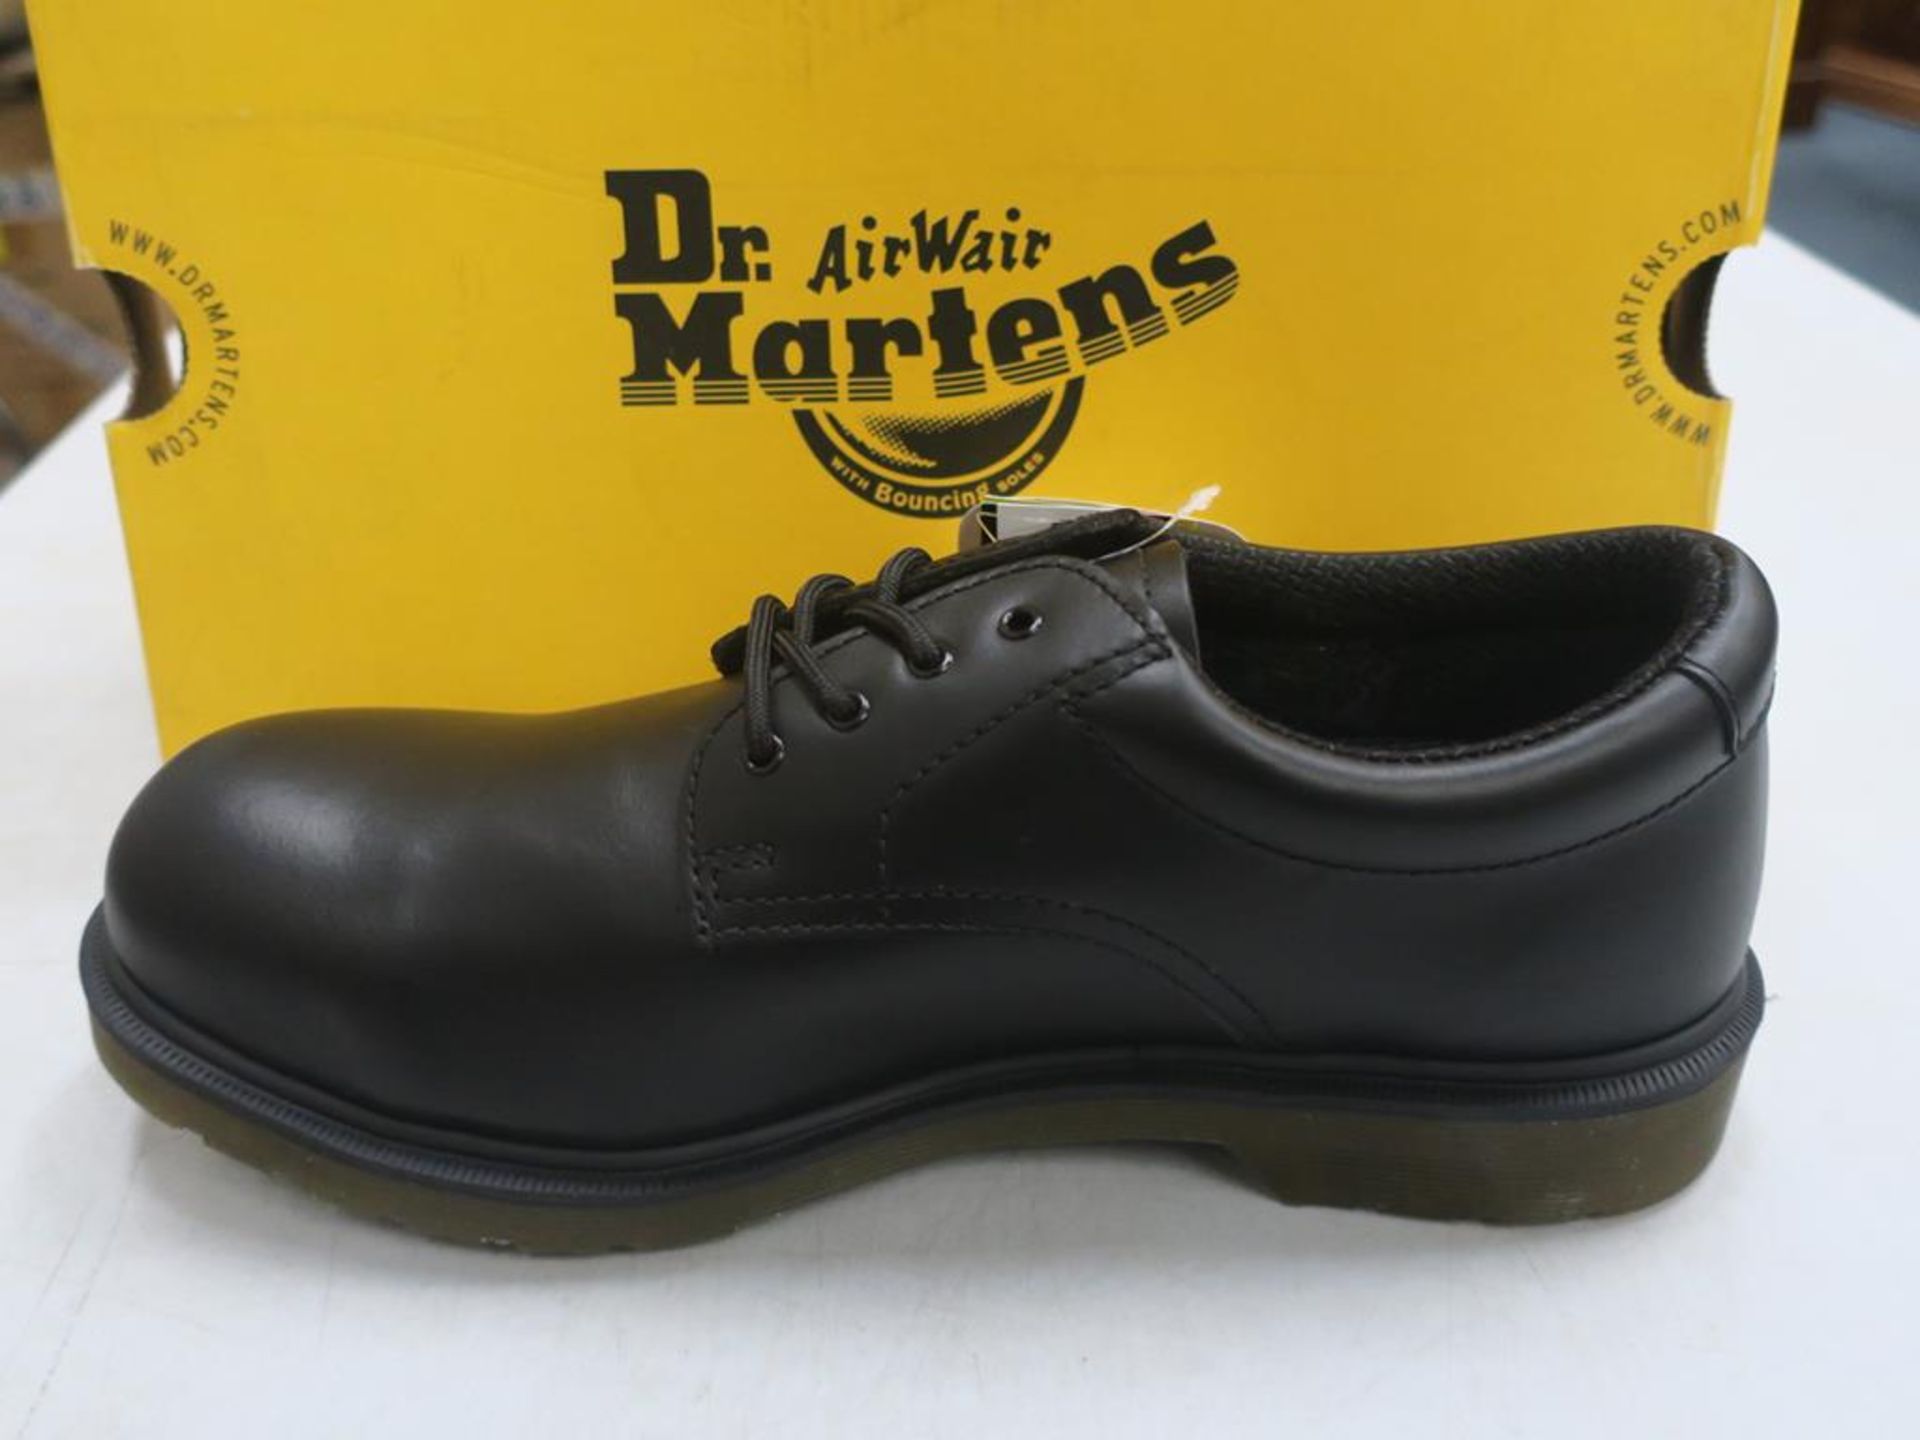 * A pair of New/Boxed Dr Martens shoes, 2216 PW black fne haircell, (13711001) UK size 10 - Image 2 of 3